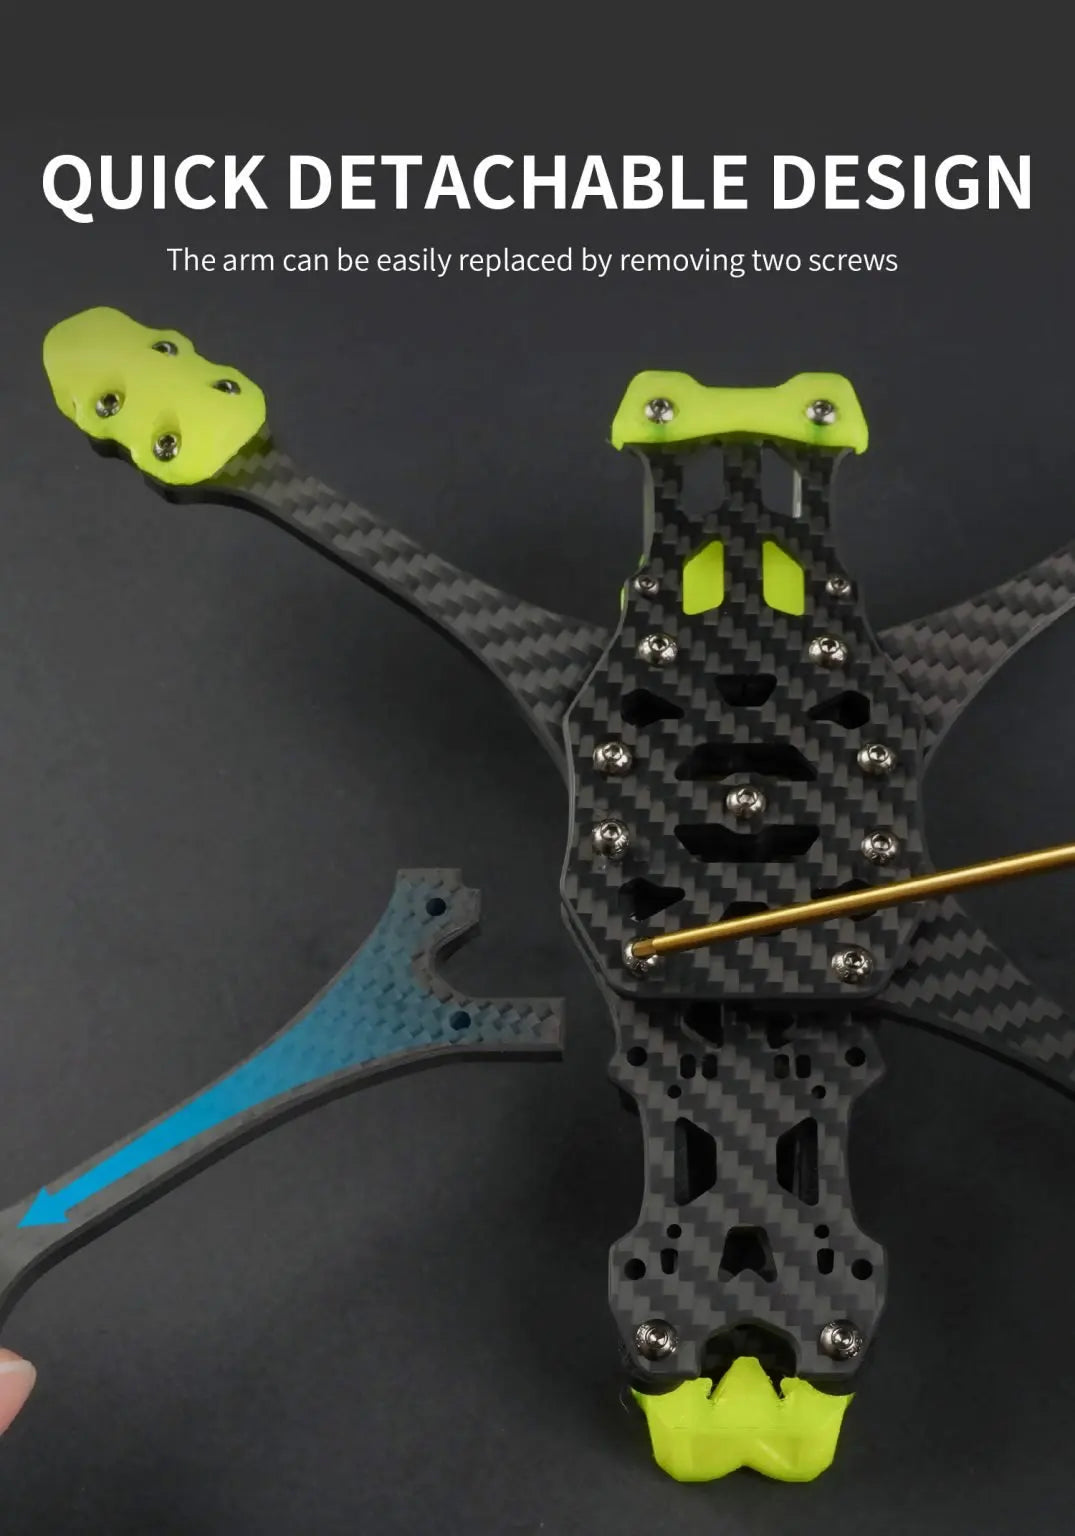 GEPRC MARK5 FPV Drone, QUICK DETACHABLE DESIGN The arm can be easily replaced by removing two